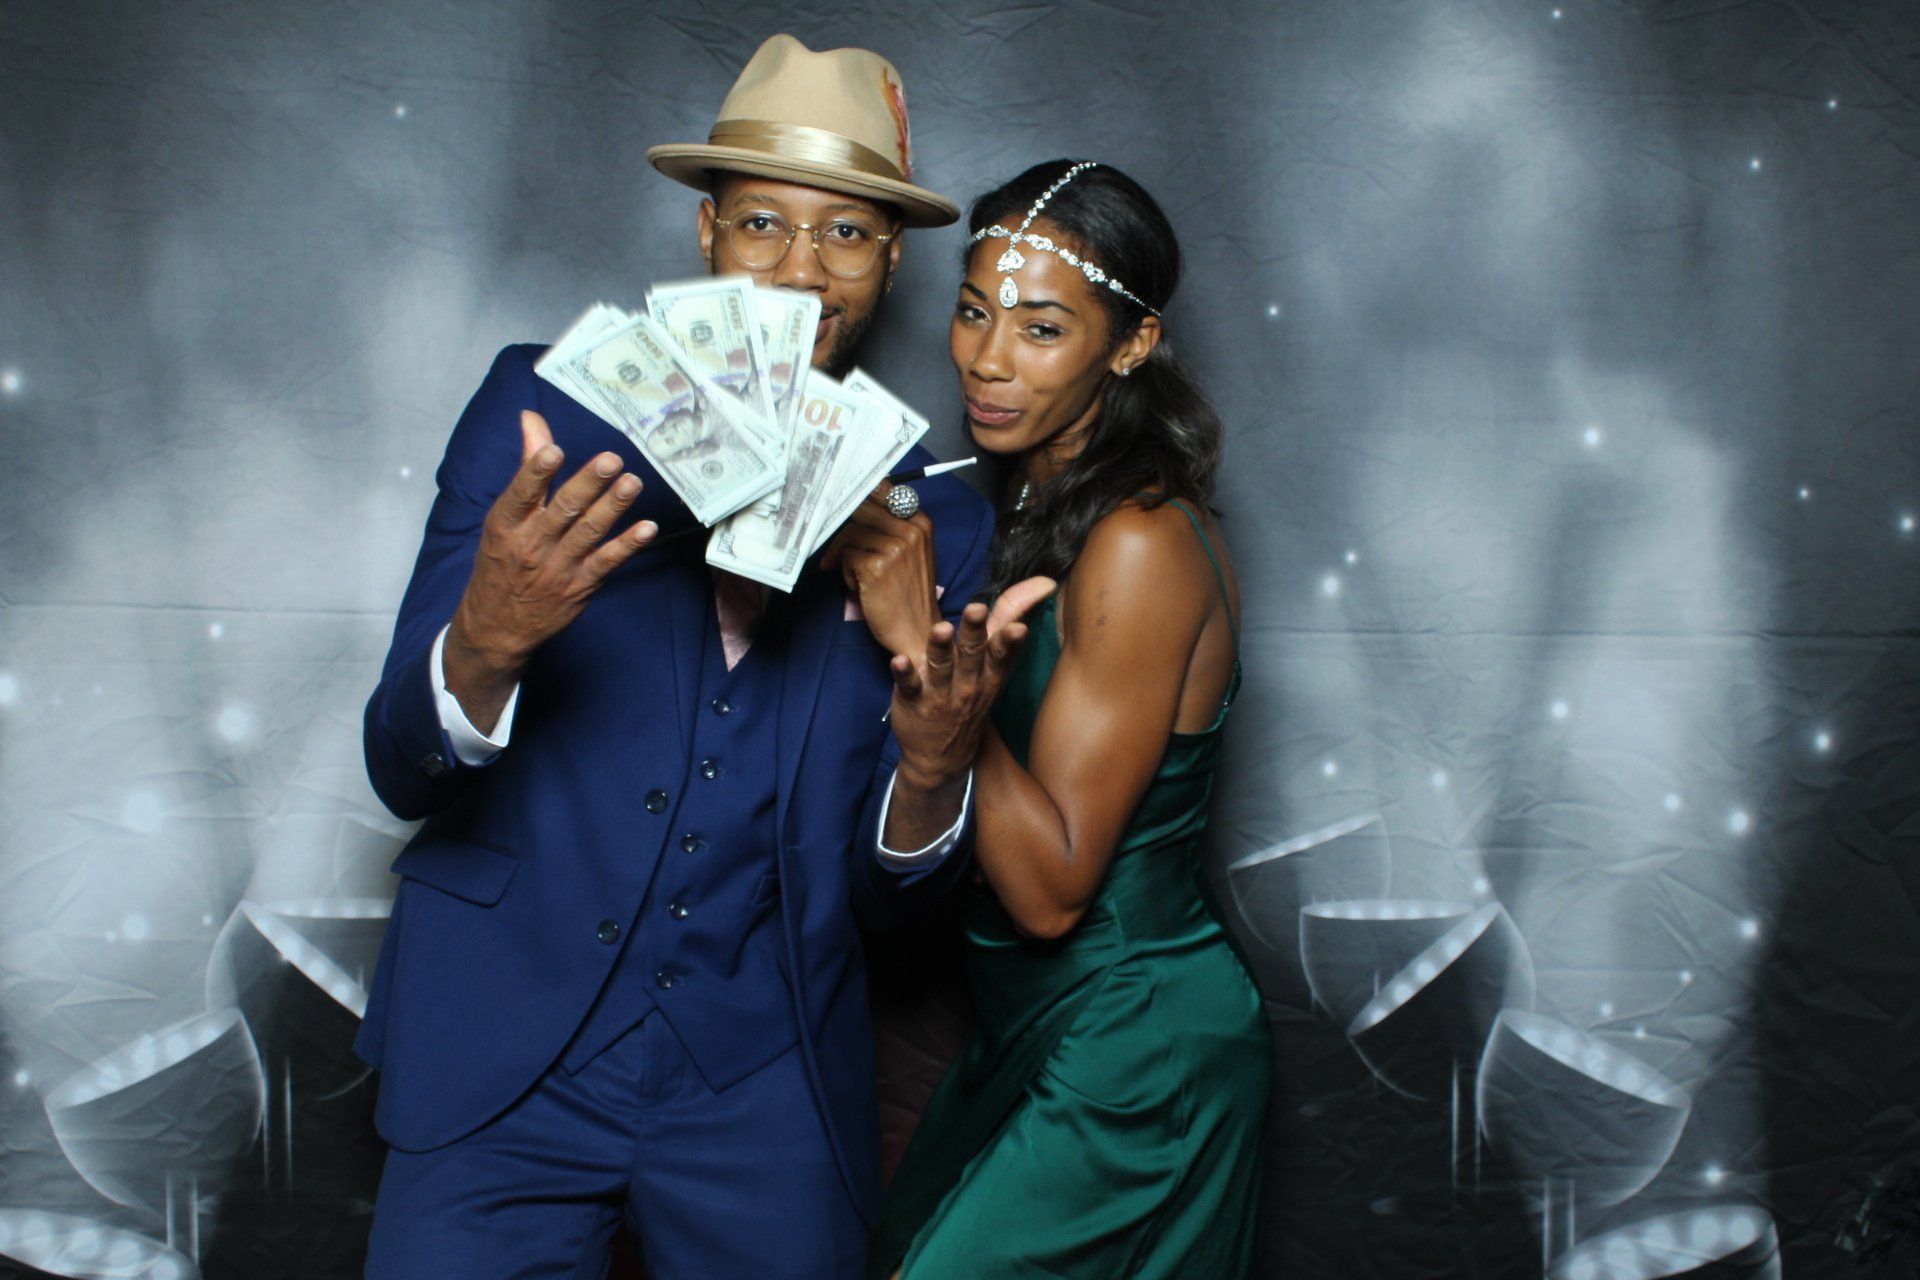 hollywood-photo-booth-picture-throwing-money